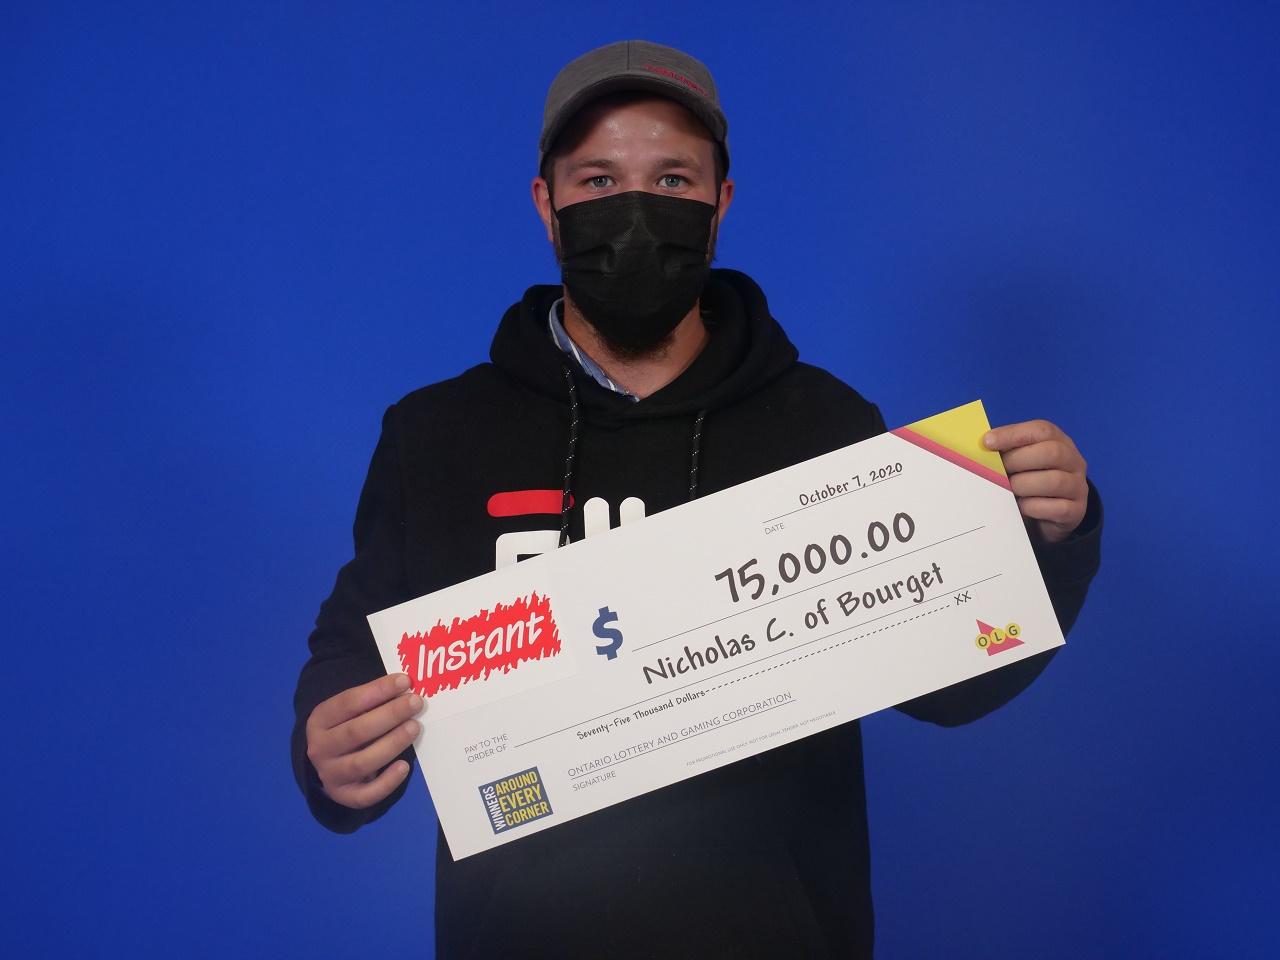 Bourget resident wins $75,000 in lottery